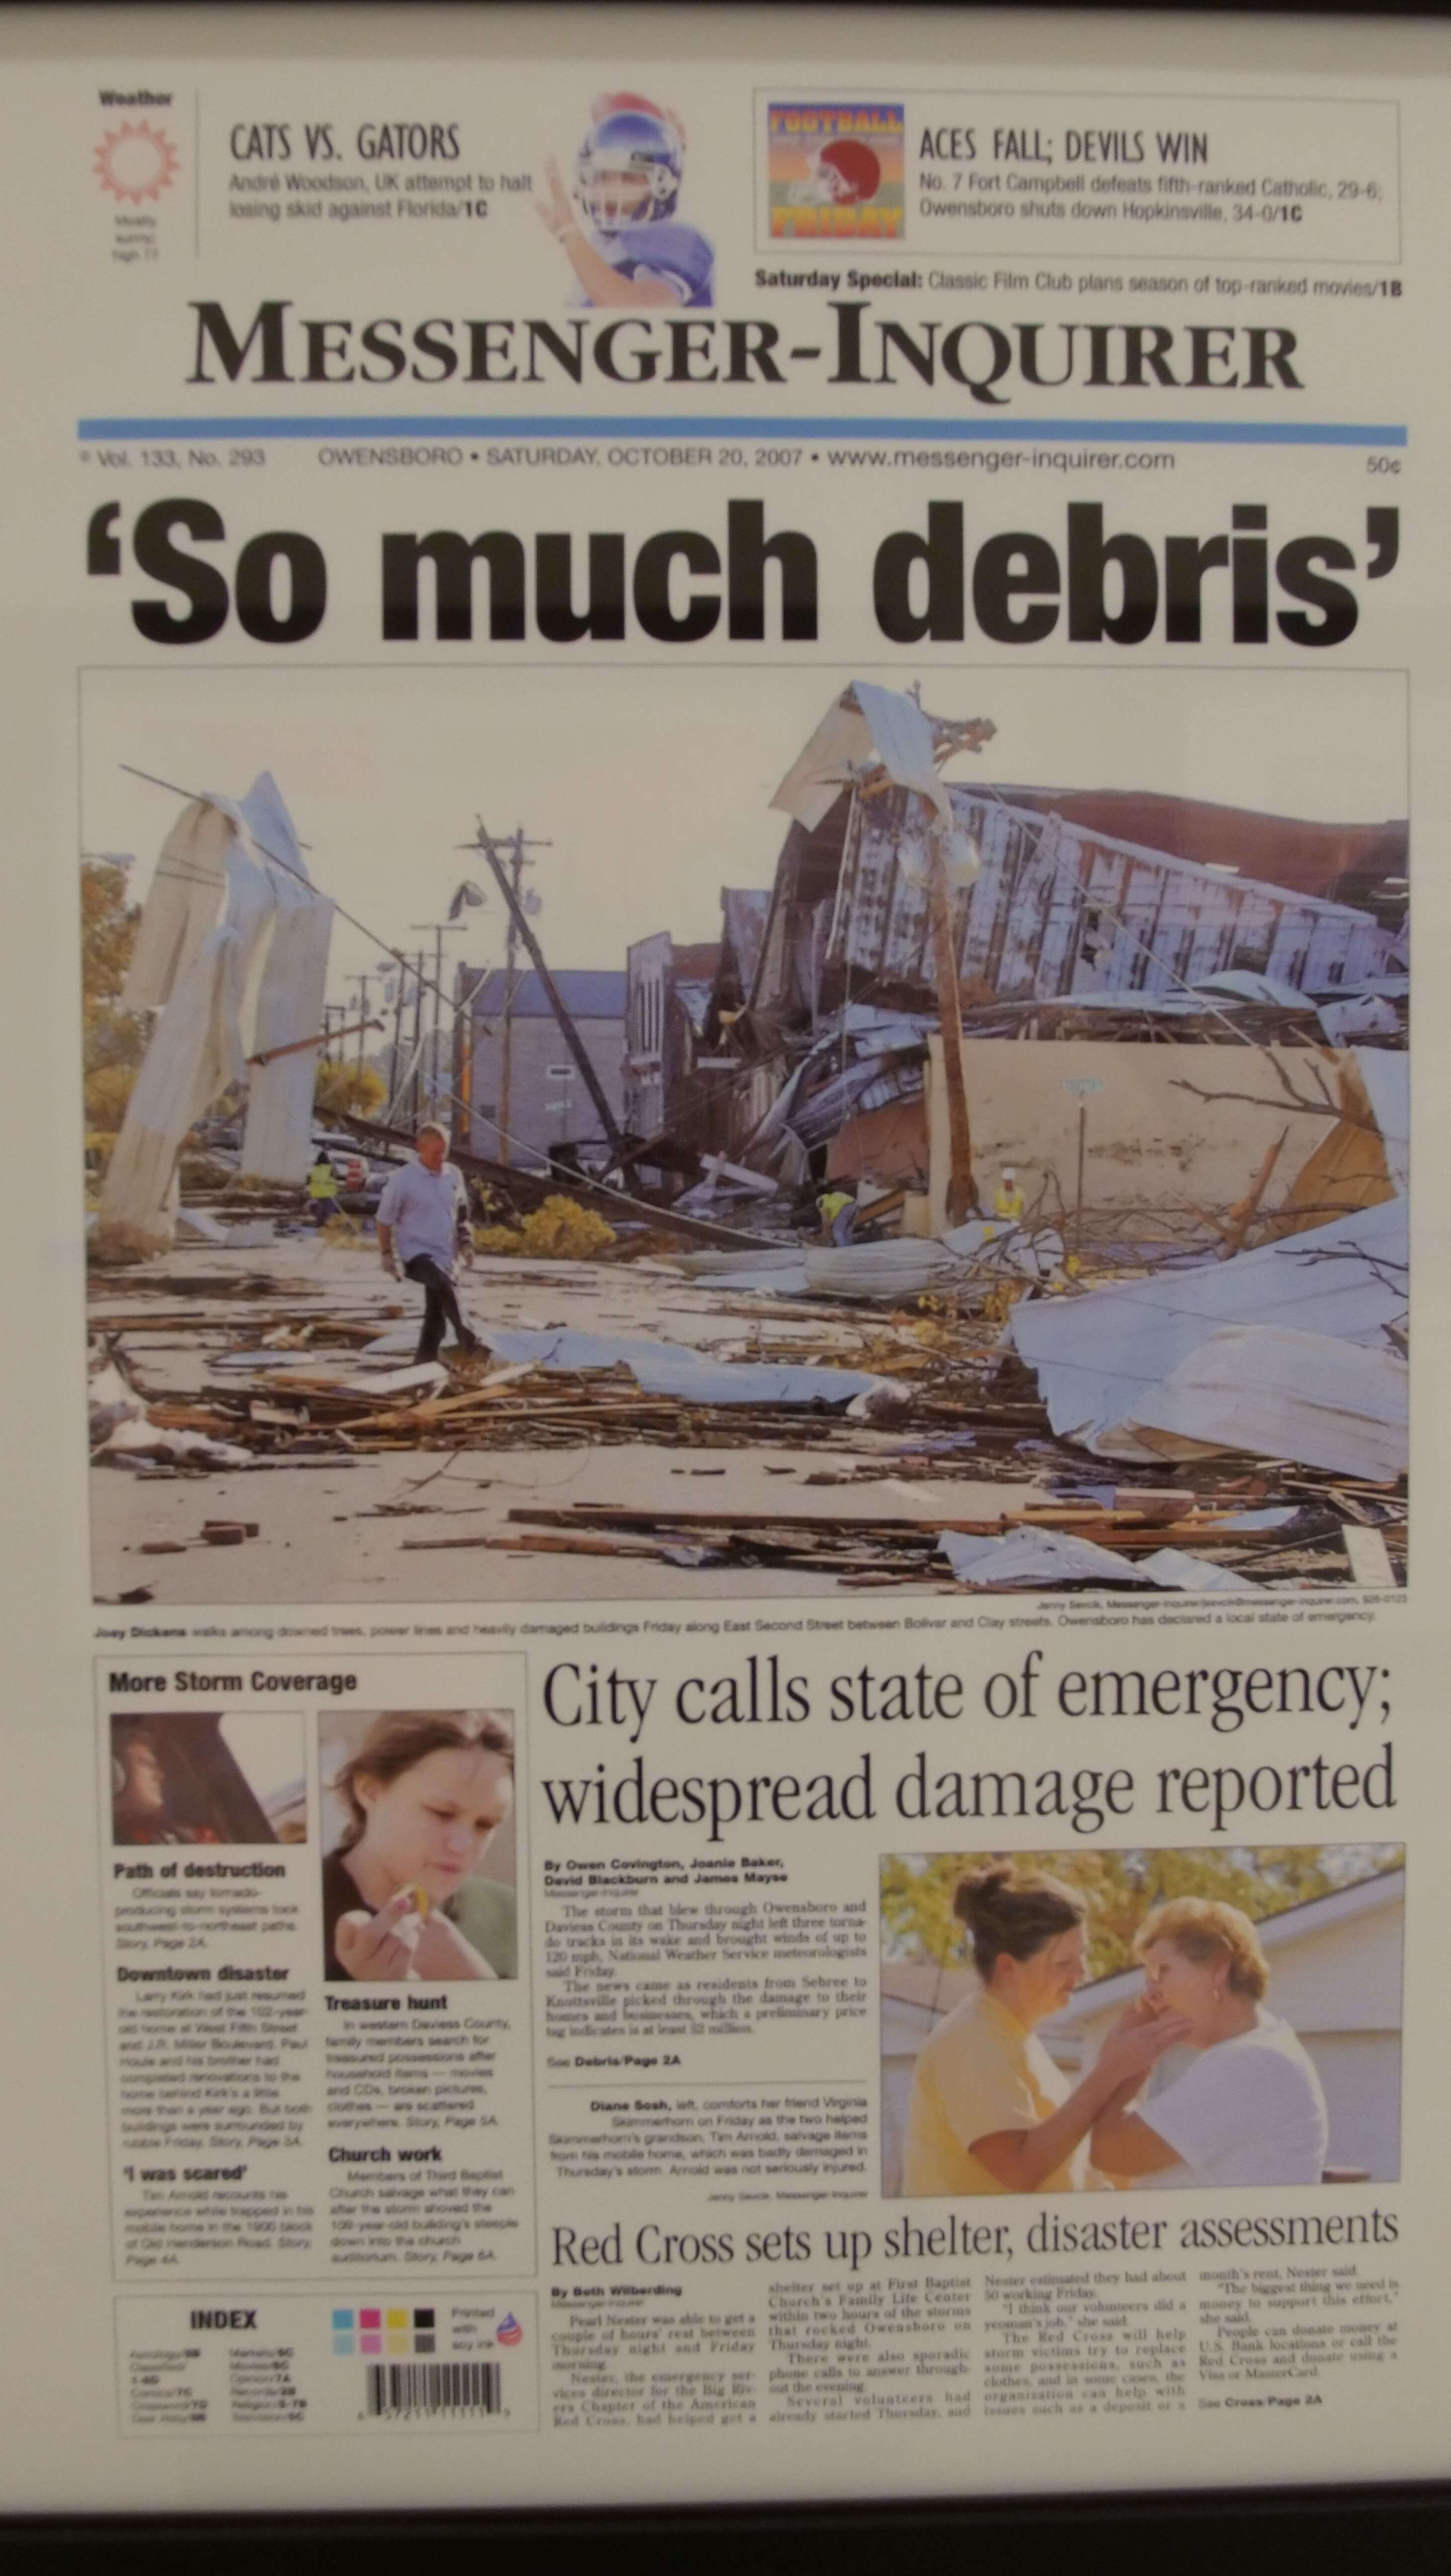 Newspaper showing debris from disaster